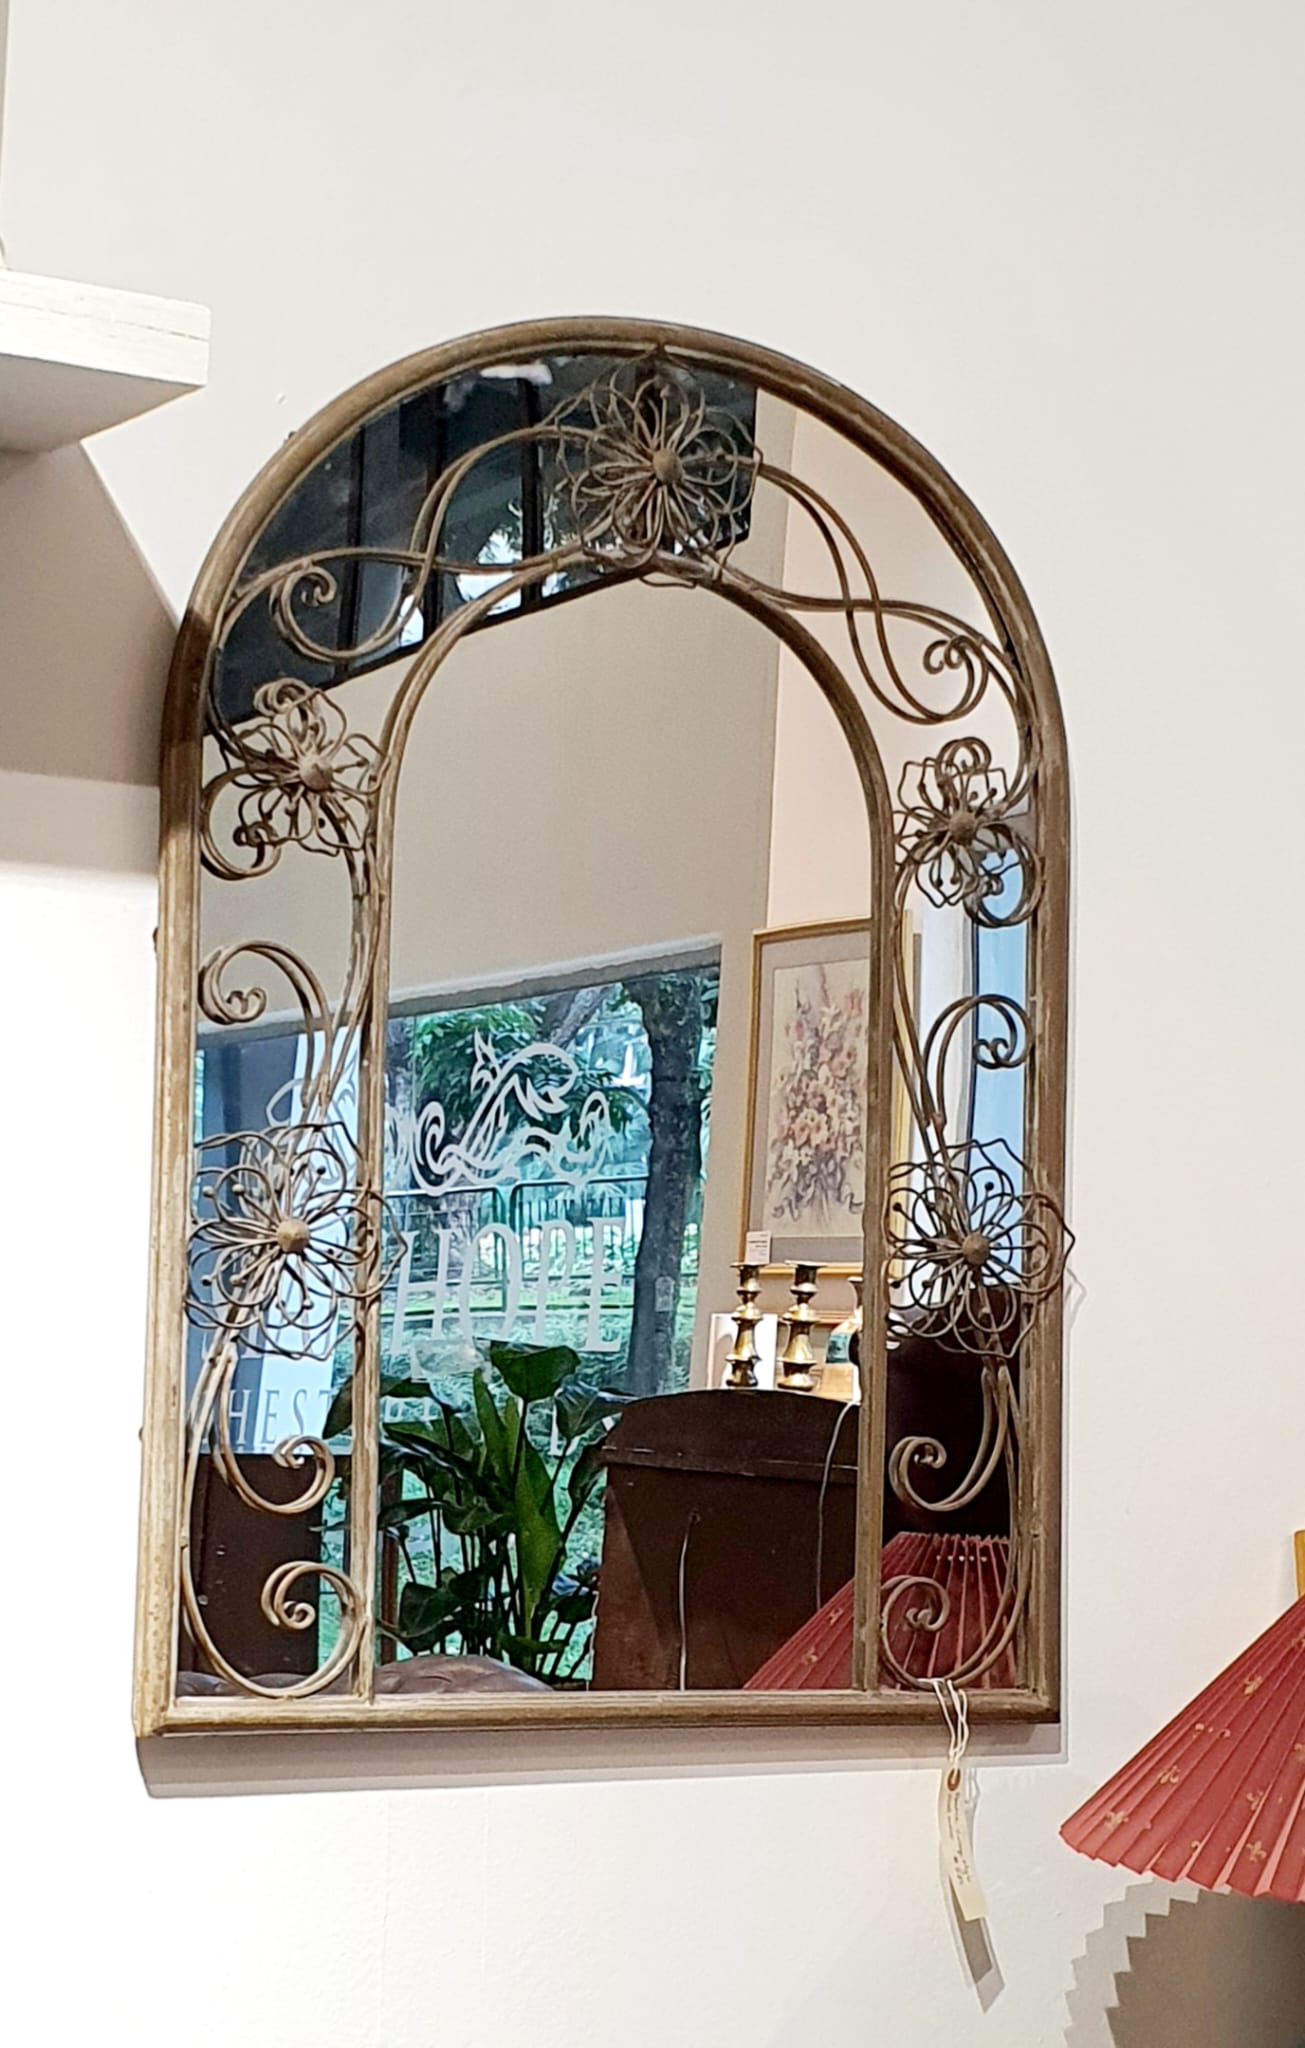 Vintage mirror wall with decorative frame